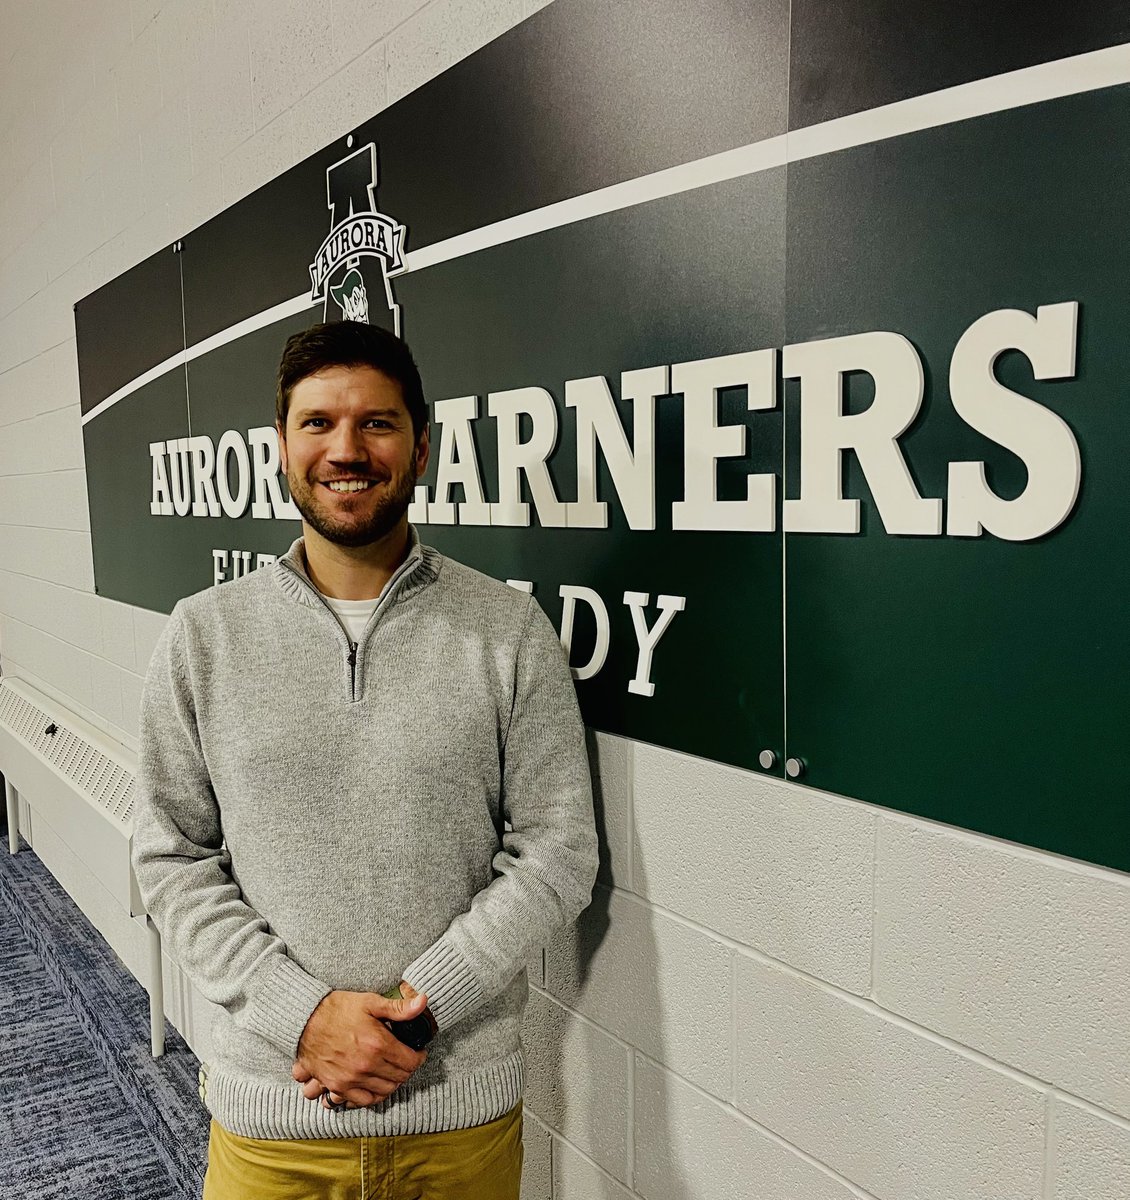 Congrats to Tyler Best who was officially BOE-approved to become Aurora High School’s new School Psychologist! Tyler previously served as a School Psych in Kenston & is an Aurora Community Member! Excited to welcome him Home to The Greenhouse! #UnitedGreenmen @Greenmensteward…